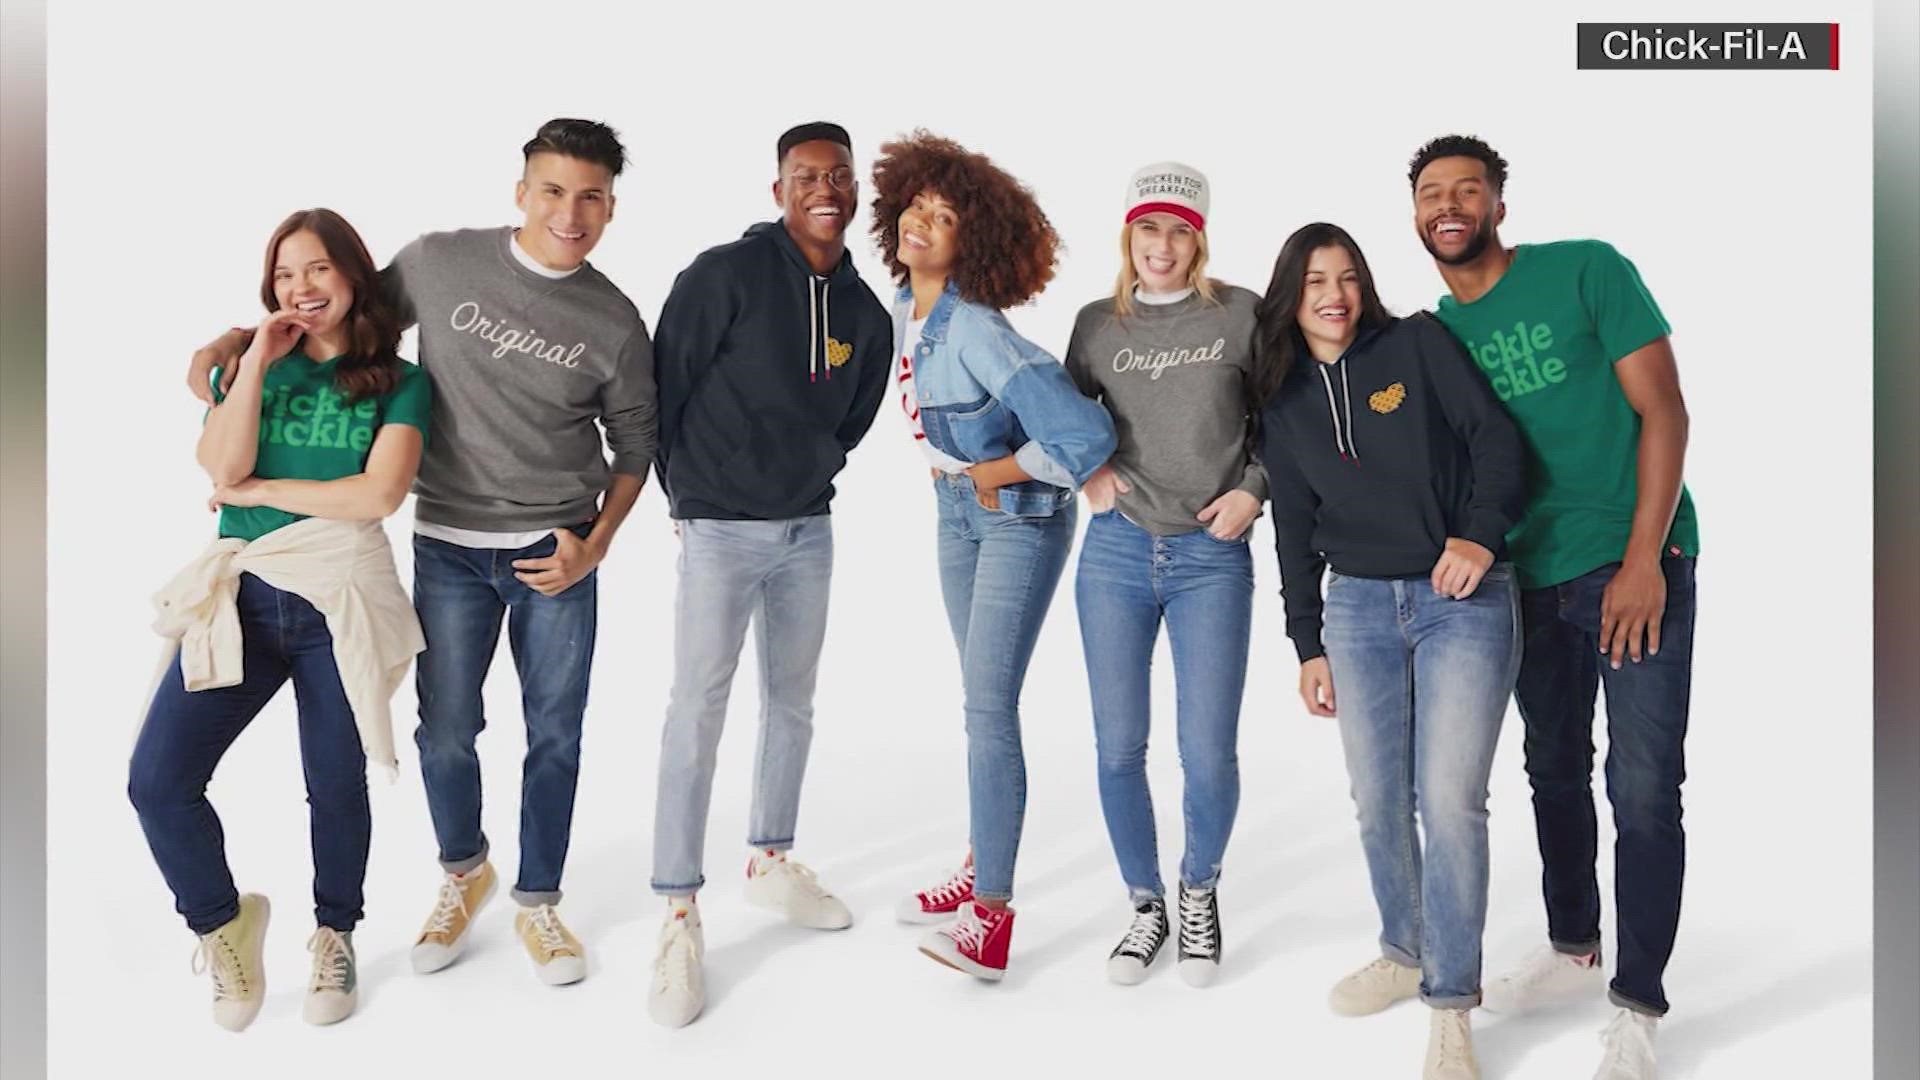 If you have a Chick-Fil-A fan on your holiday shopping list, you might want to check out their new merchandise which includes waffle fry hoodies and pickle tees.